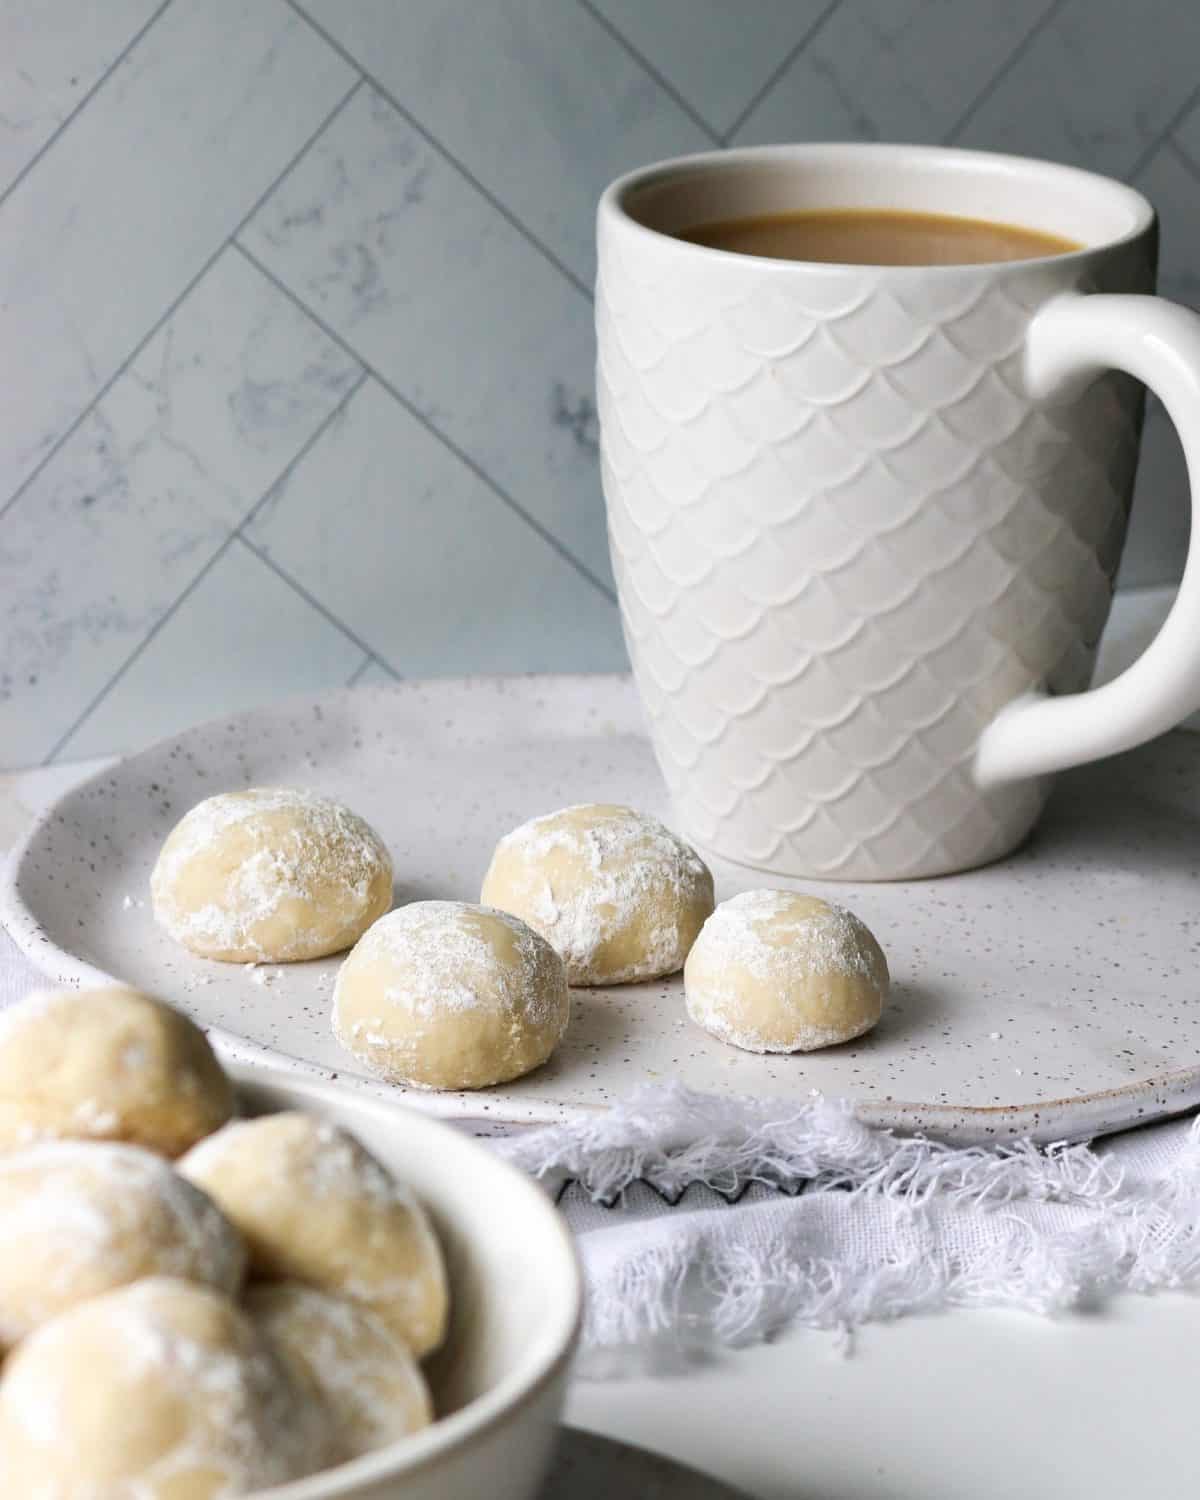 Powdered cookies with a fresh cup of hot coffee in the background.